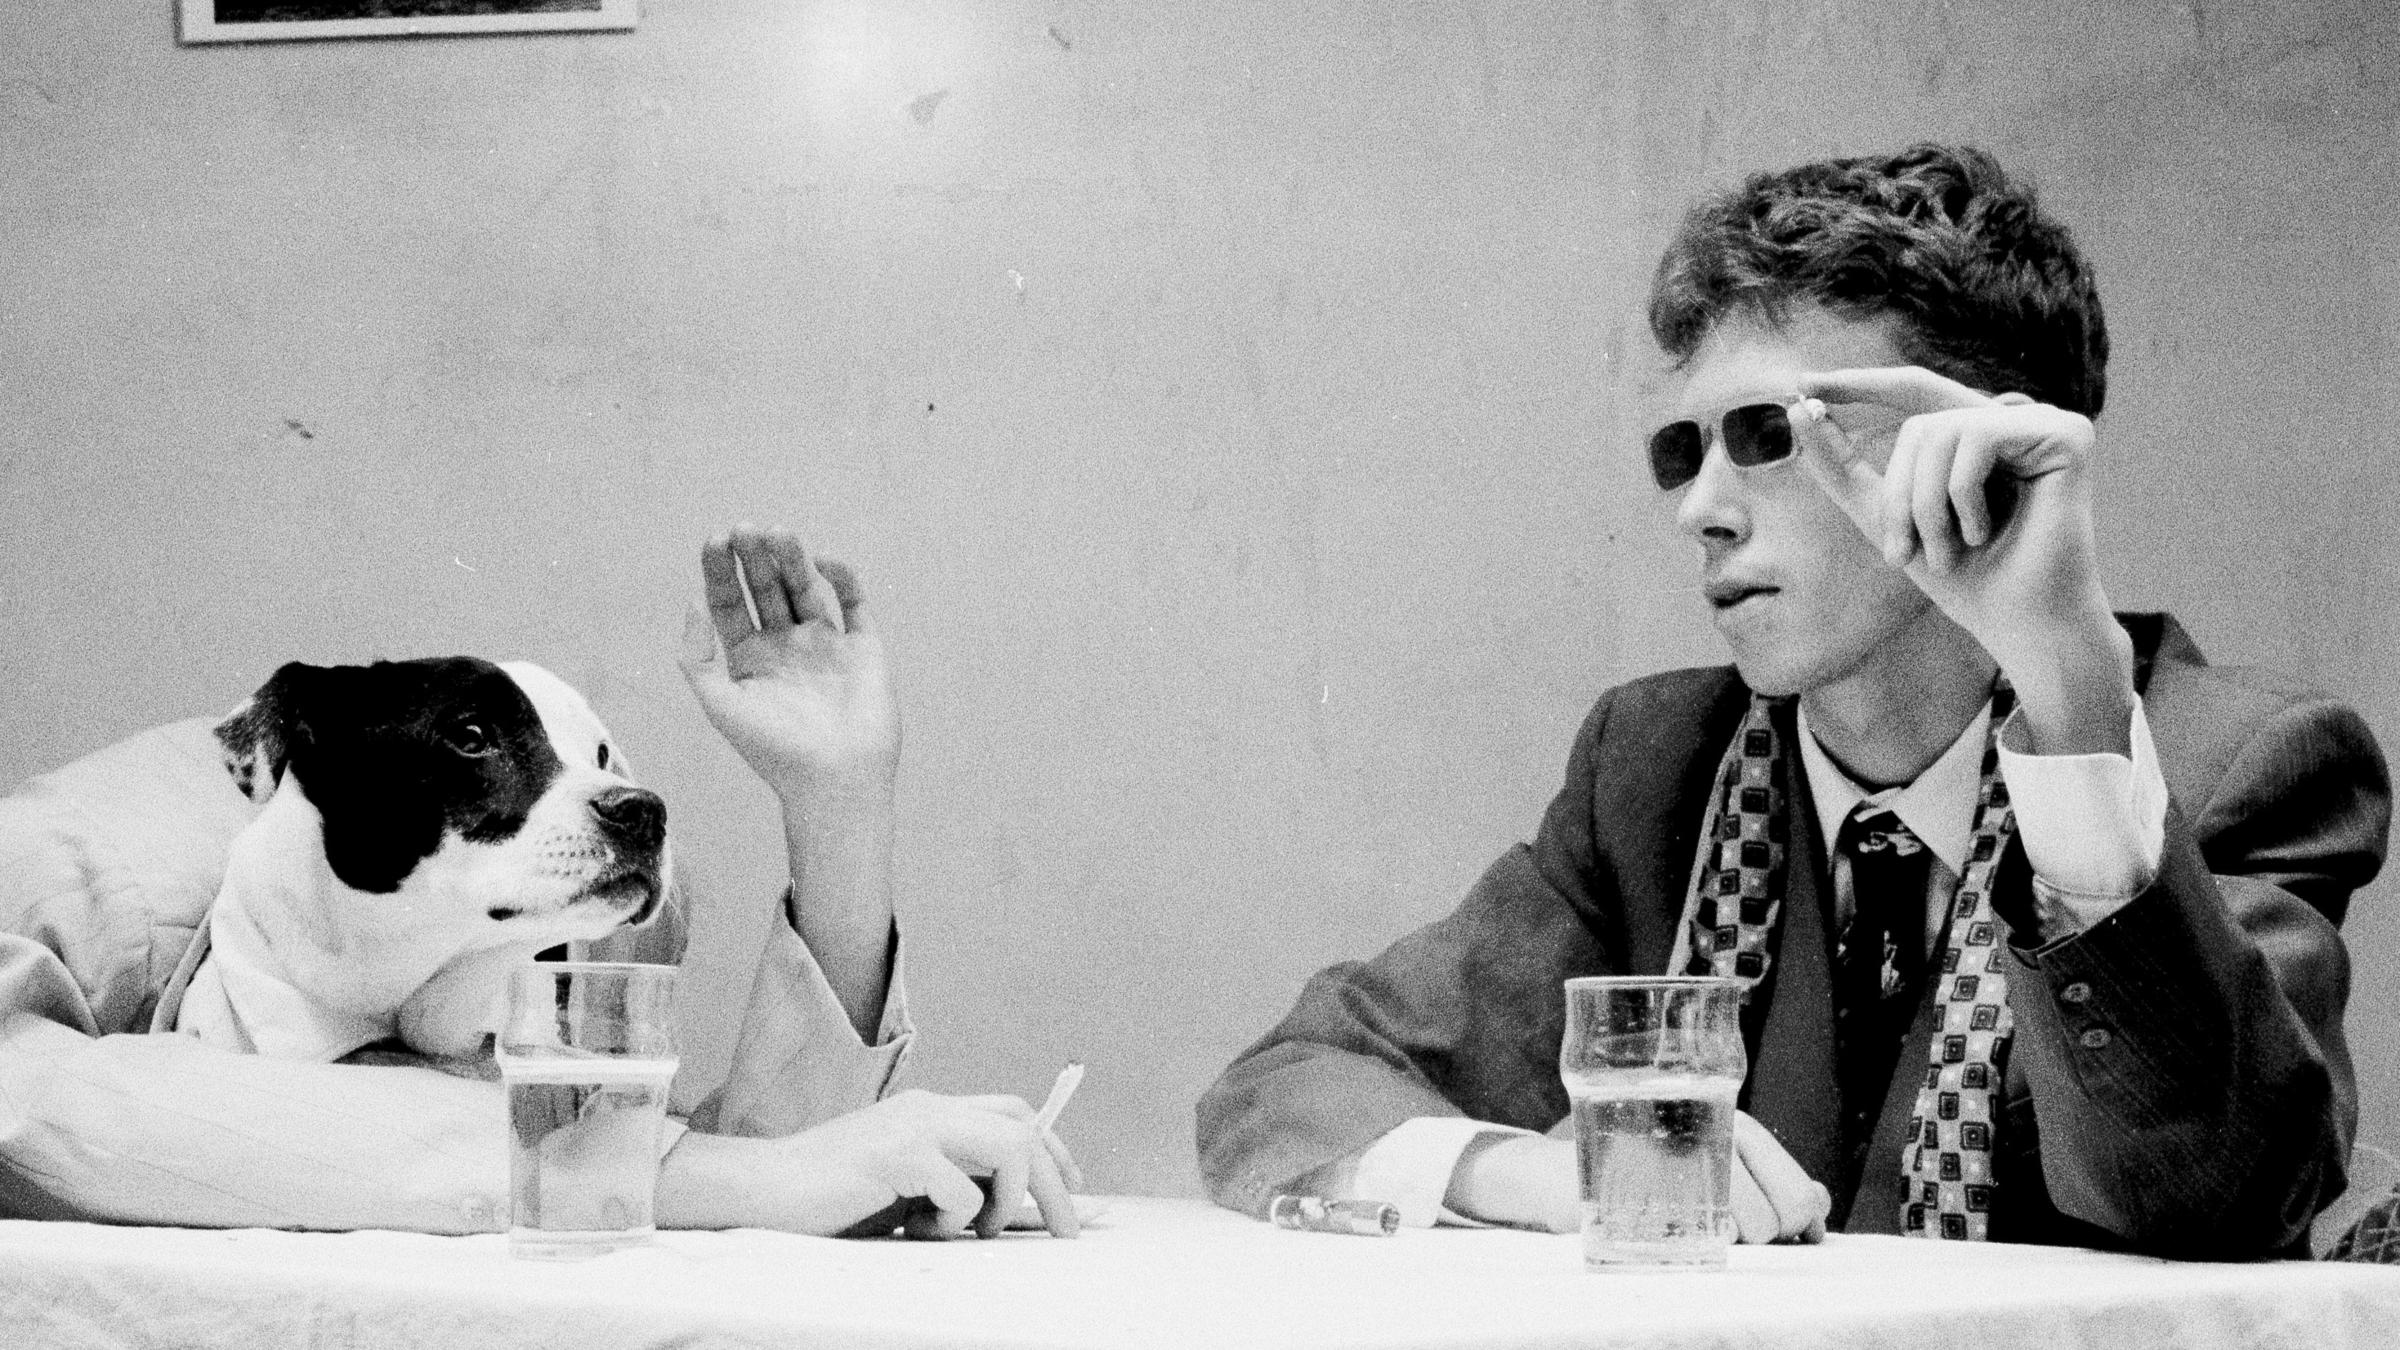 King Krule shares trippy new video and announces expansive tour